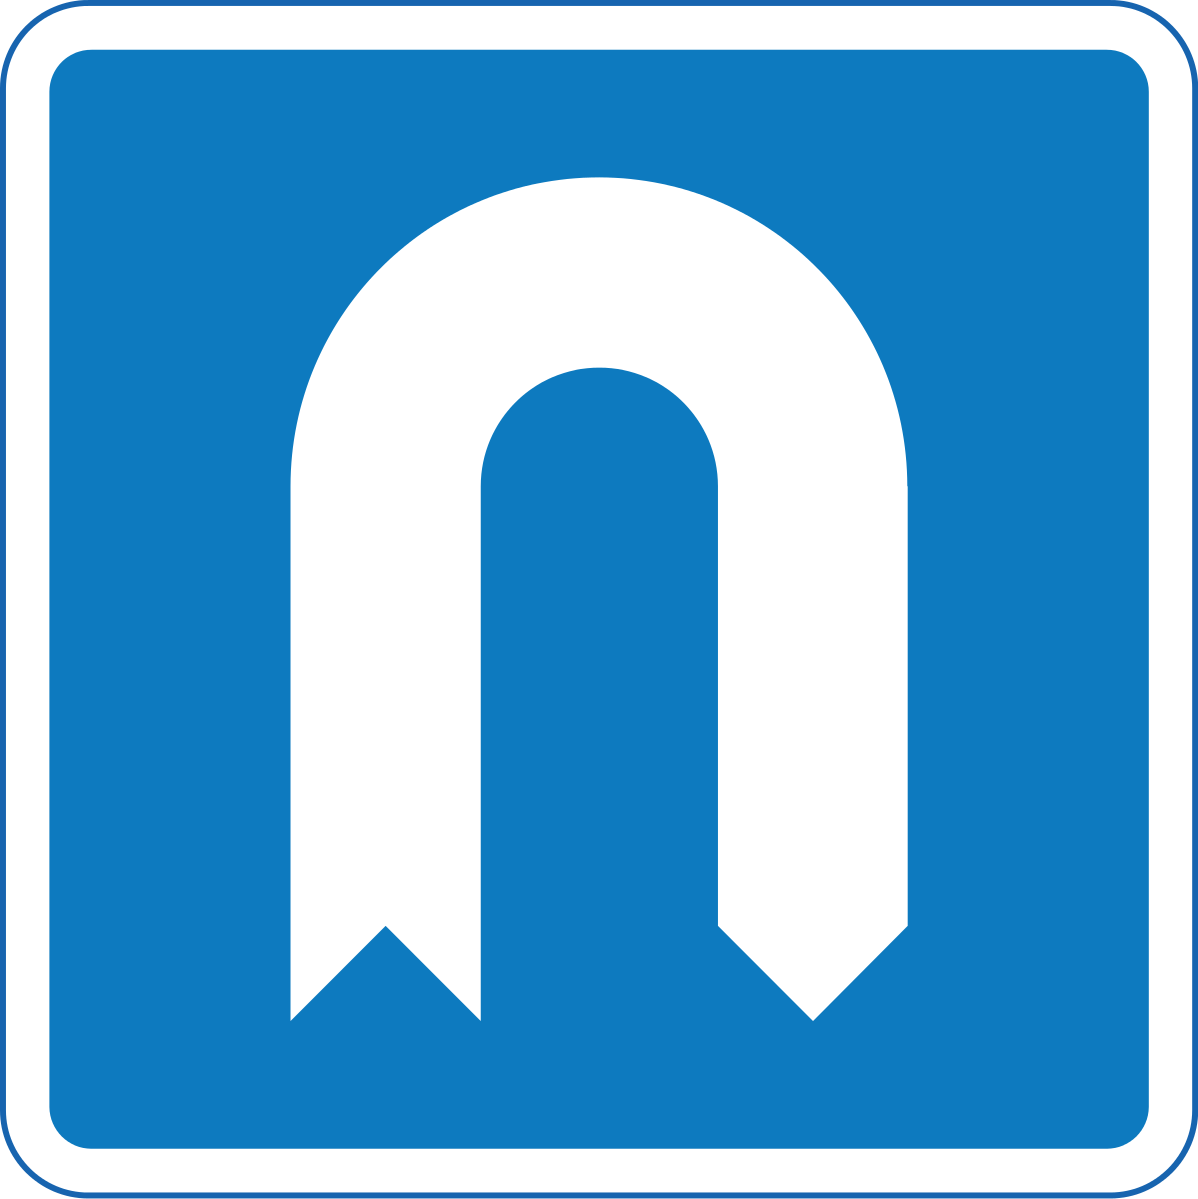 Indication of a U-turn lane, on the lane closest to the road divider or carriageway